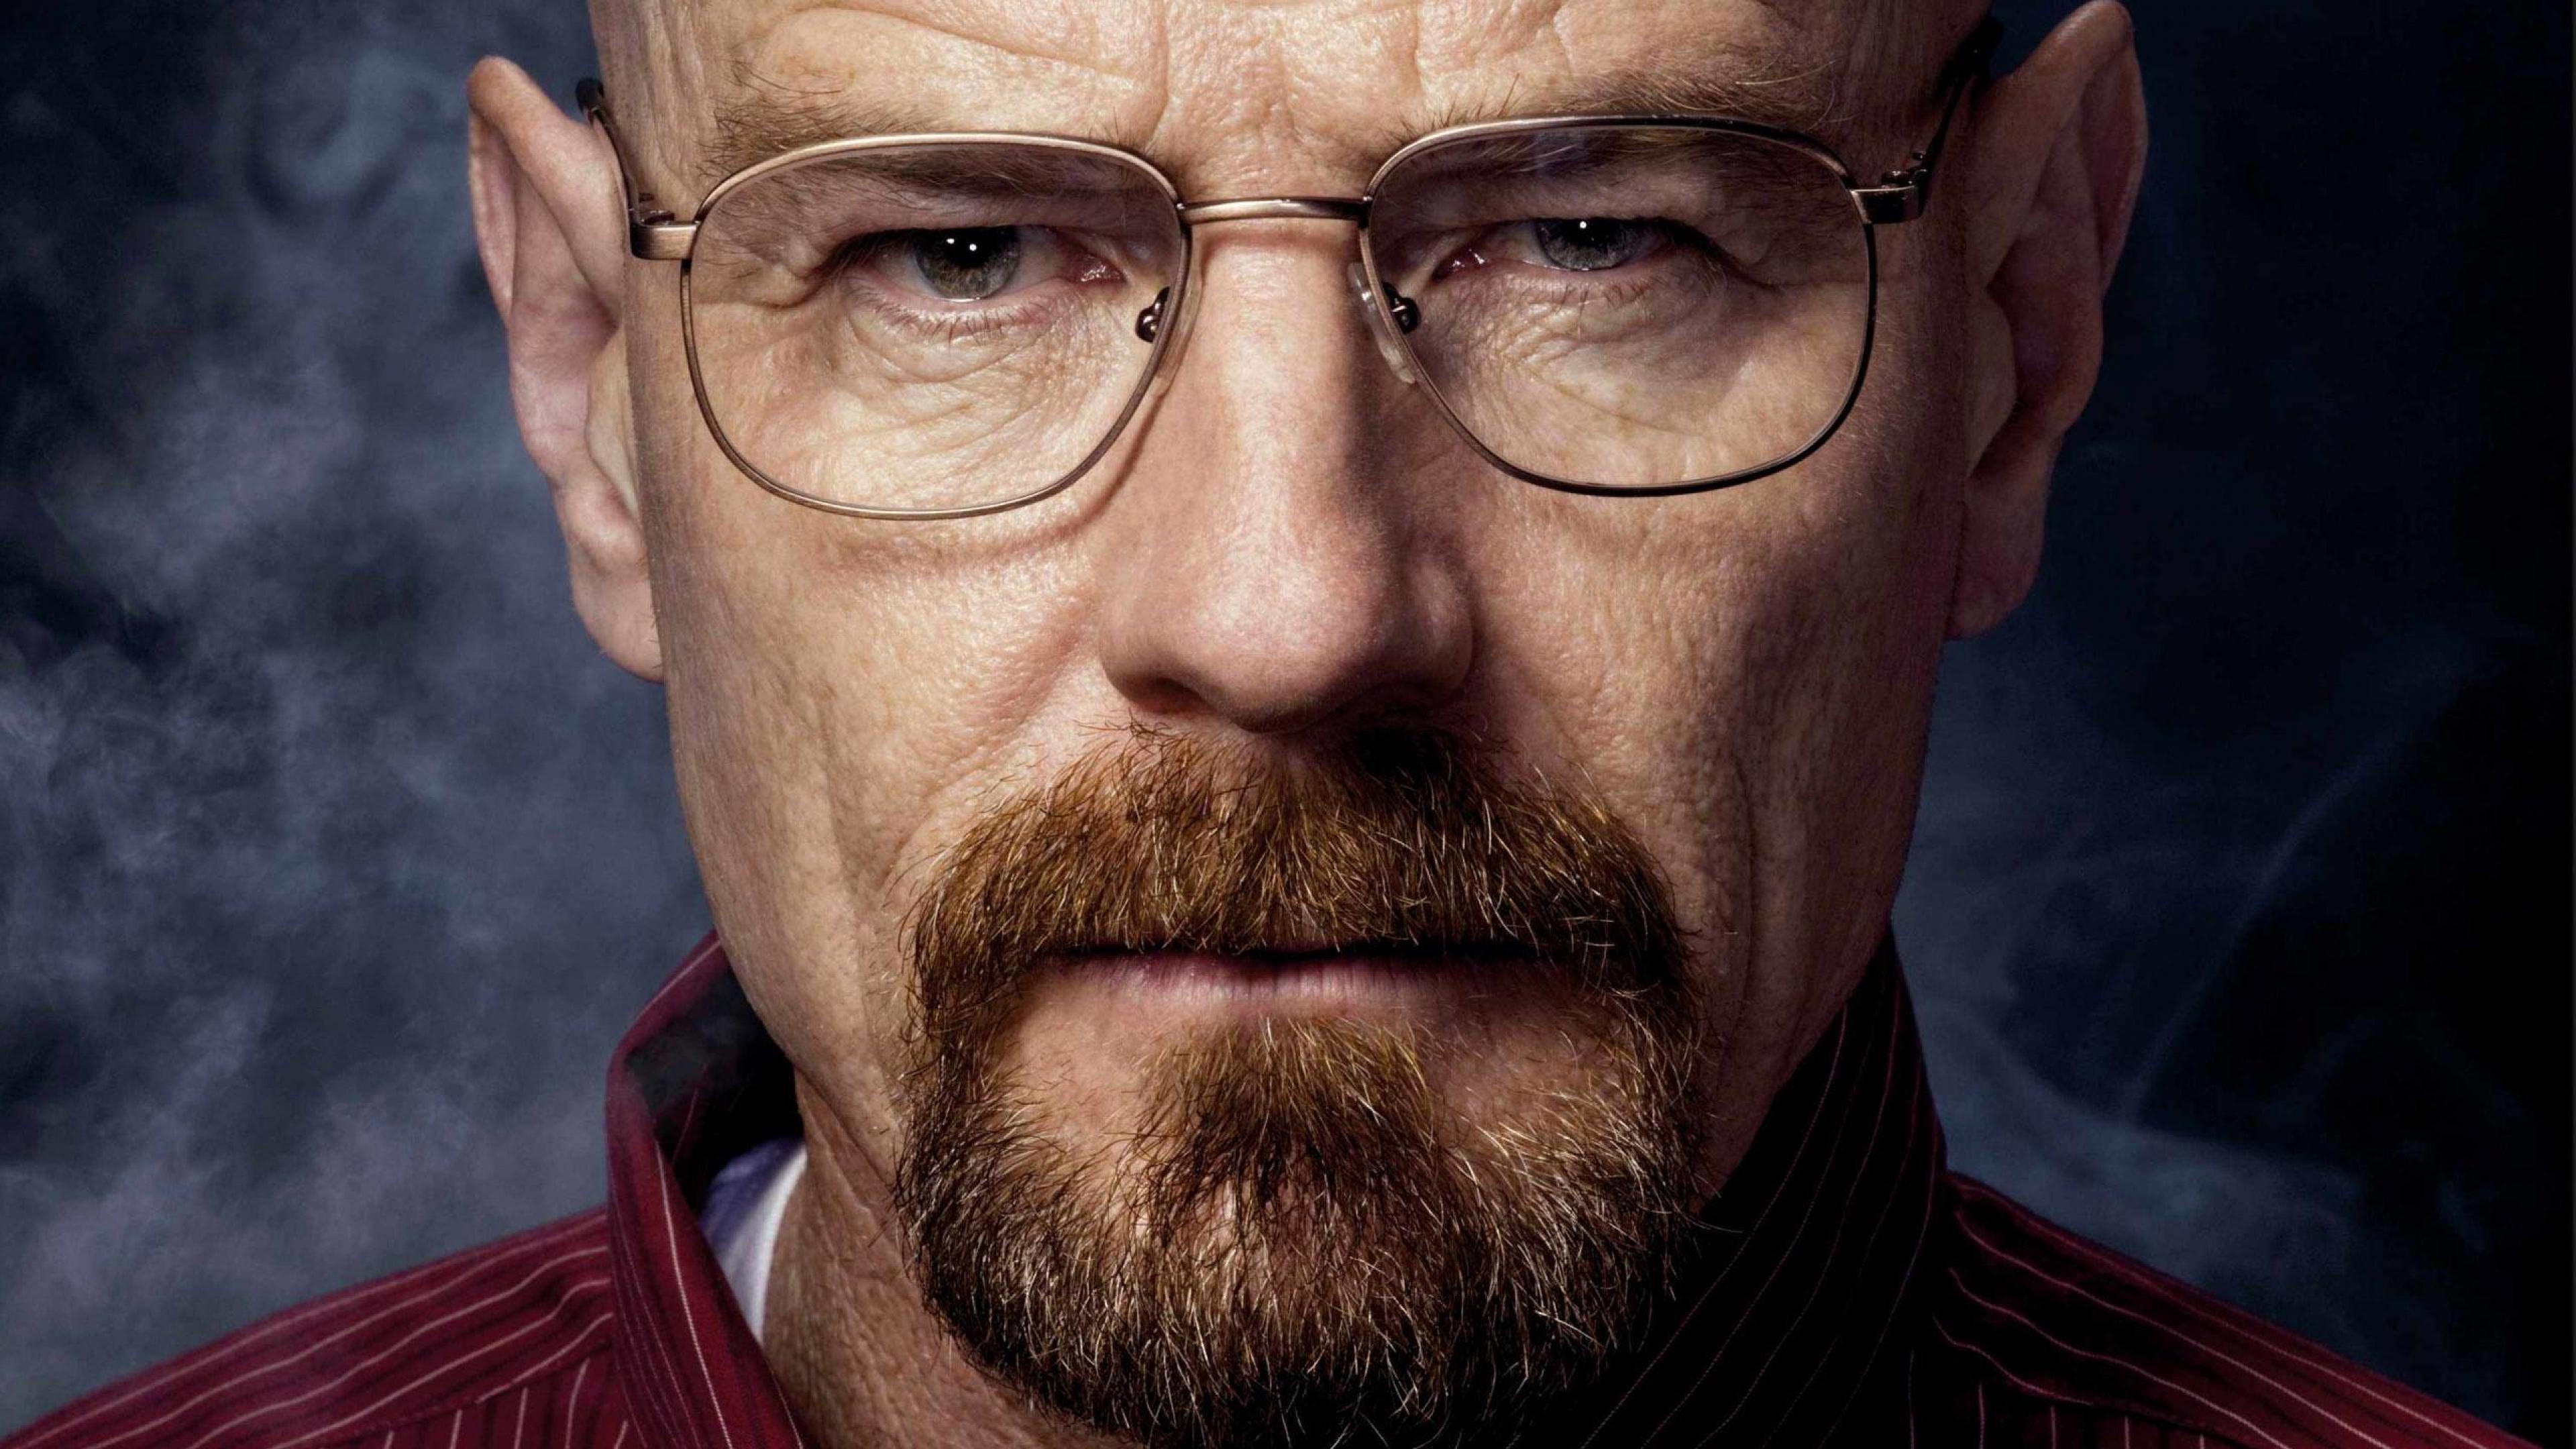 Walter Breaking Bad Wallpapers Wallpaper Cave Images, Photos, Reviews